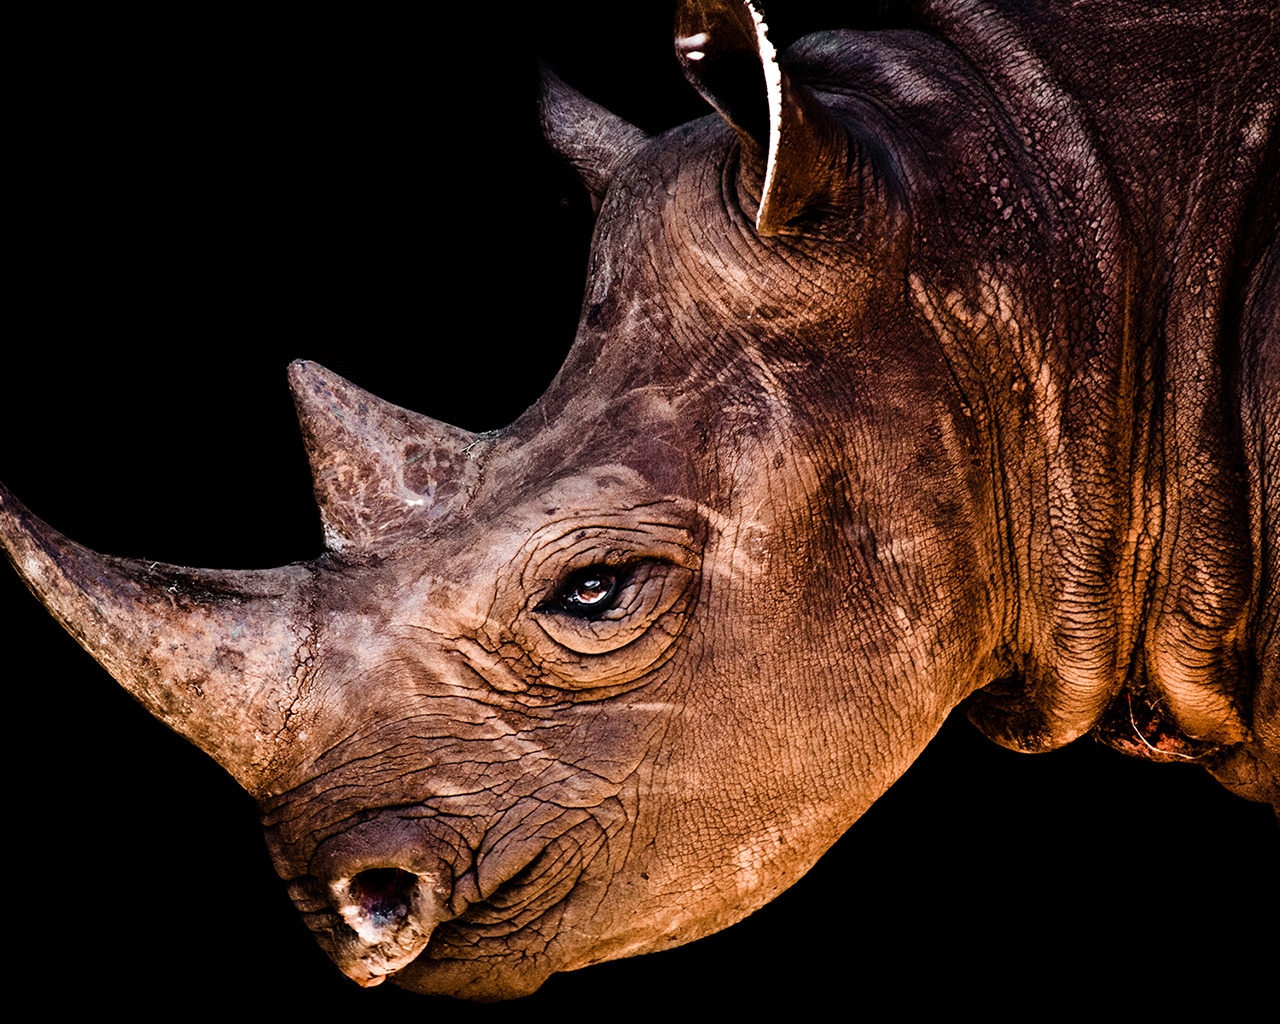 Rhino Face for 1280 x 1024 resolution